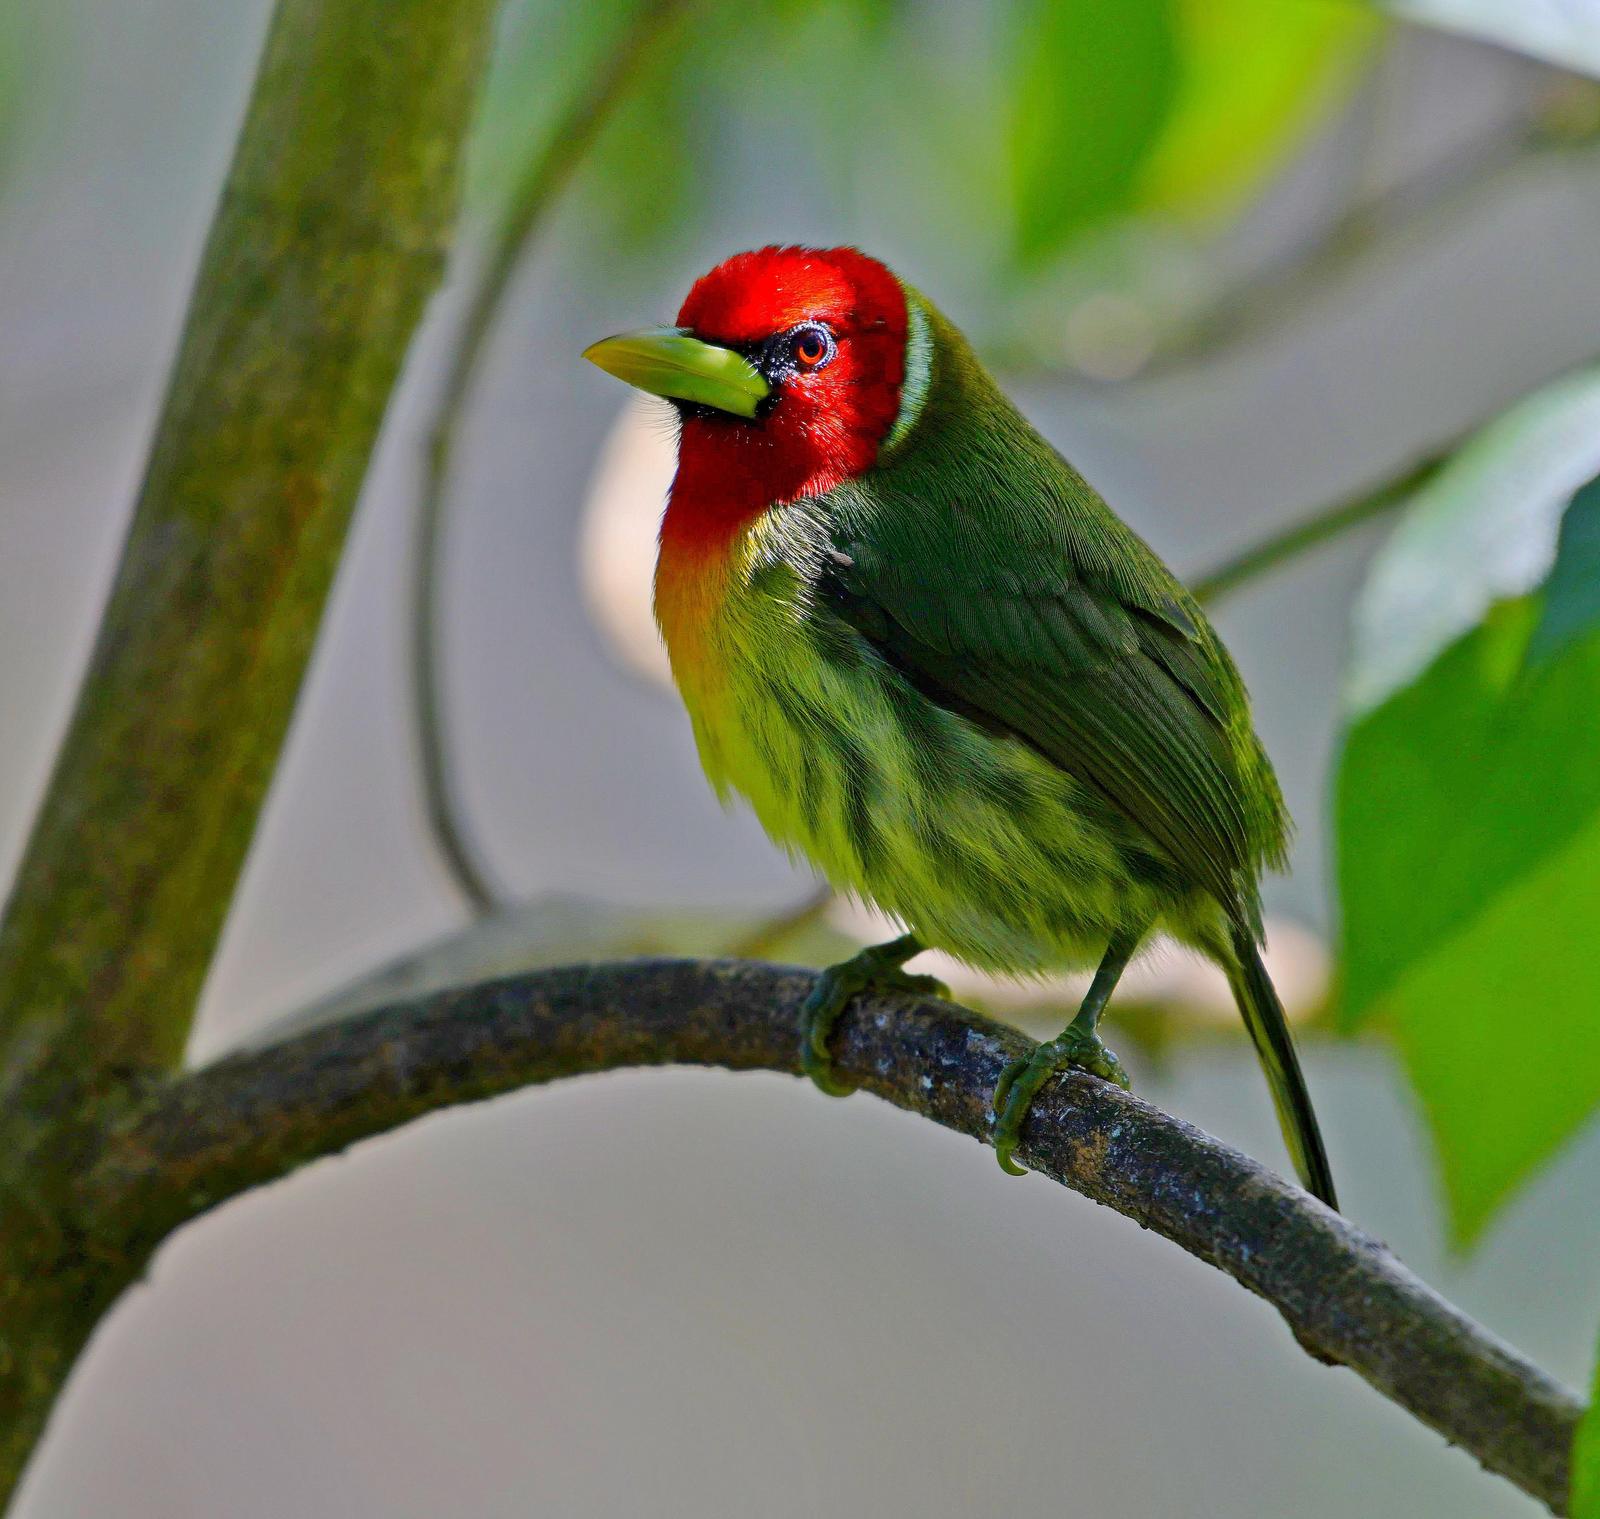 Red-headed Barbet Photo by Paul Arneson